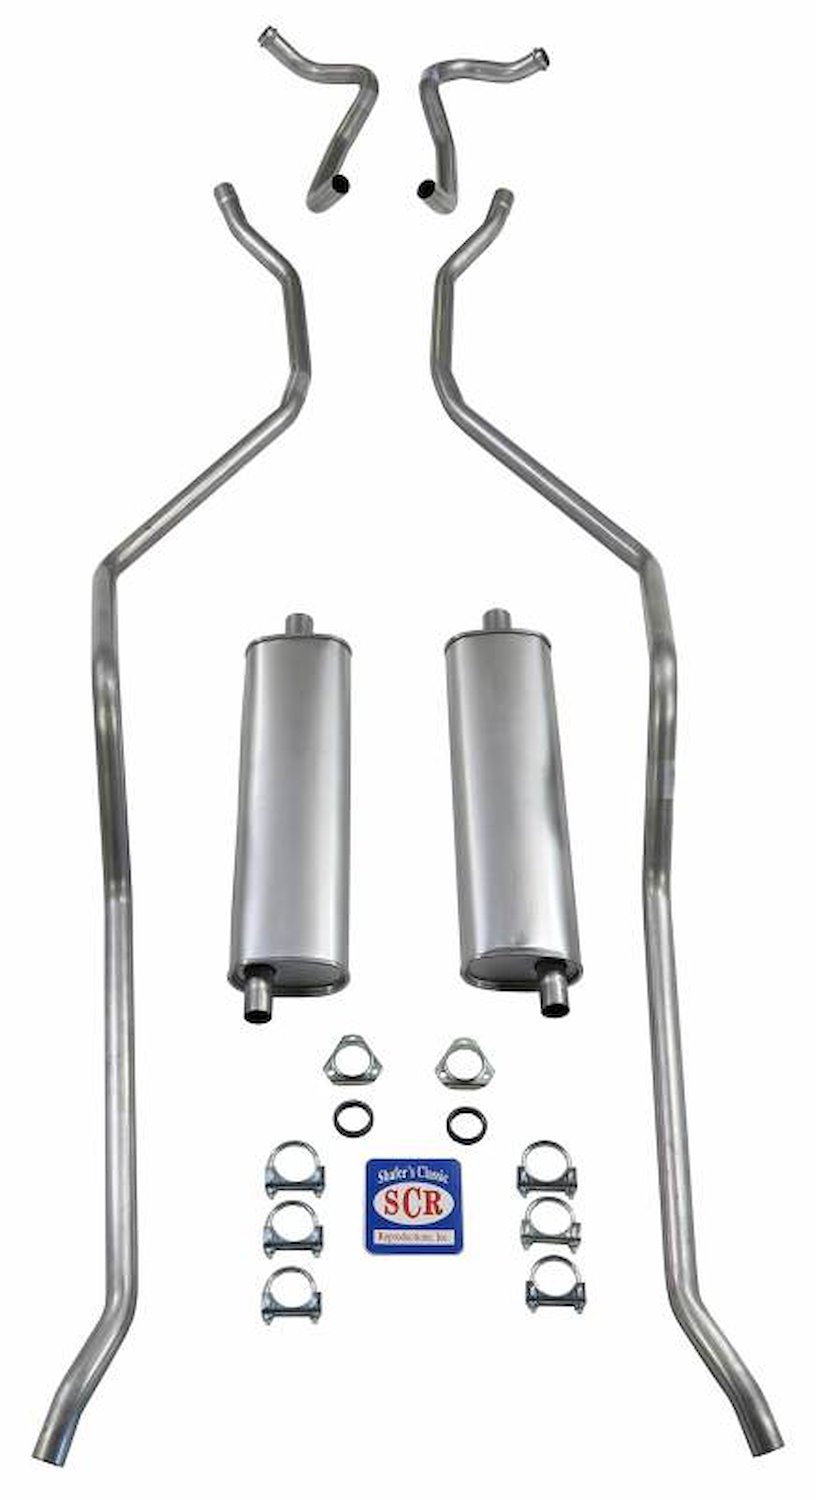 73071S 1959 El Camino Exhaust System 8-cyl 283 Dual Exhaust, 304 Stainless Steel